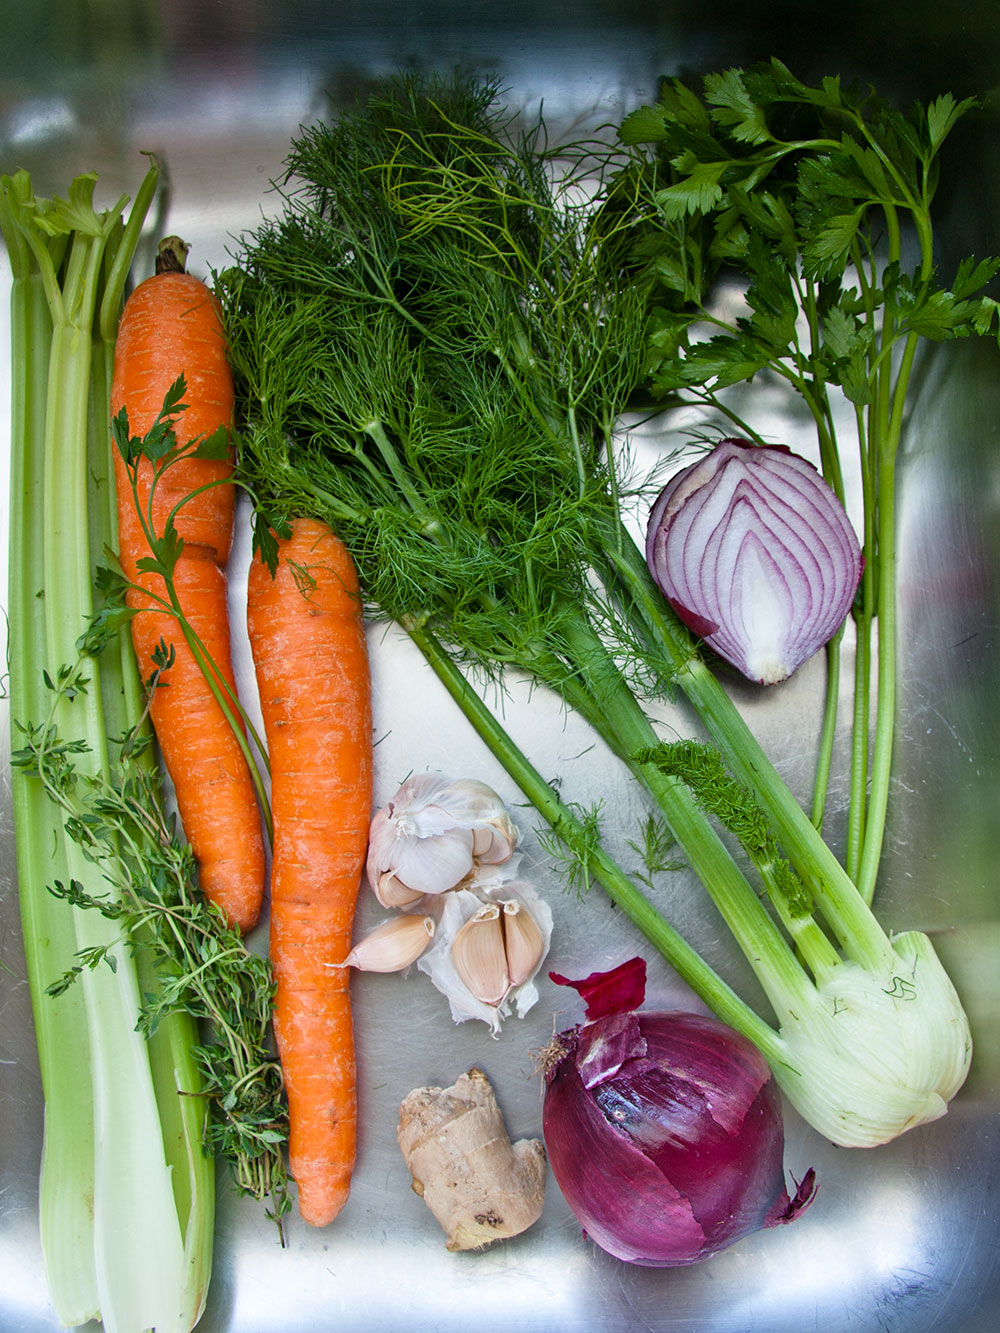 How to Make Vegetable Broth 1